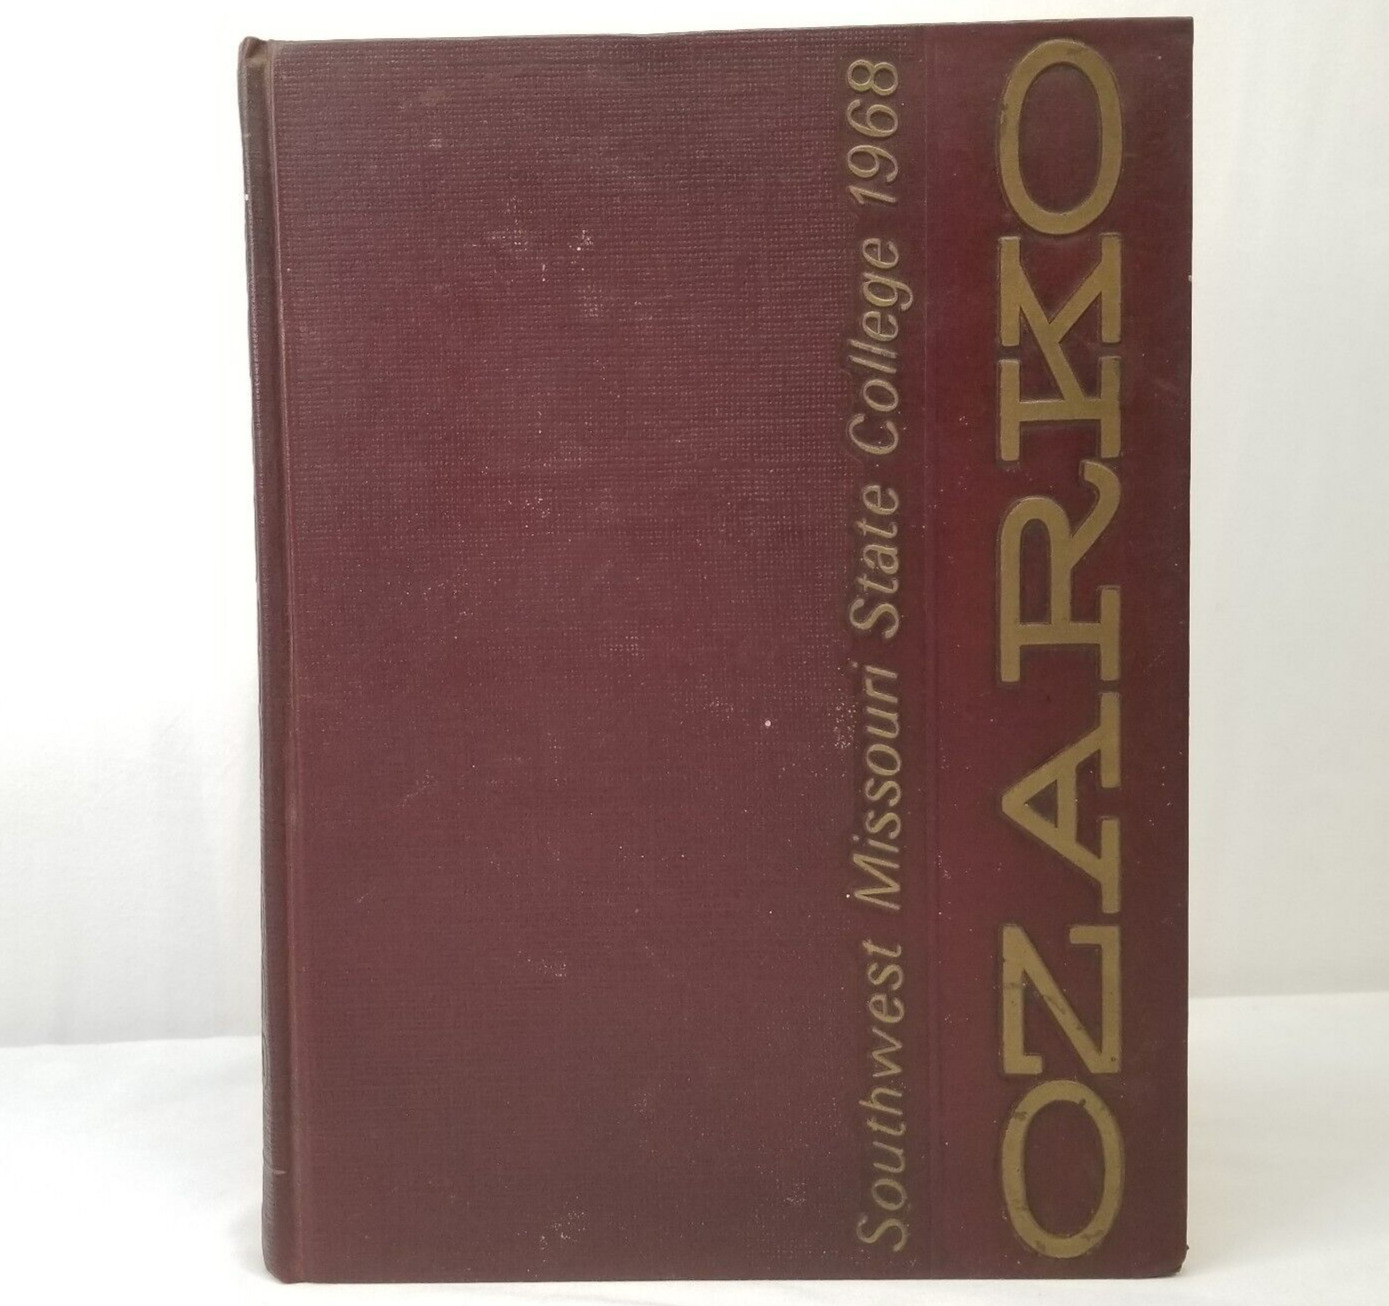 Curtis Perry Yearbook SMS 1968 Ozarko Southwest Missouri State University Annual